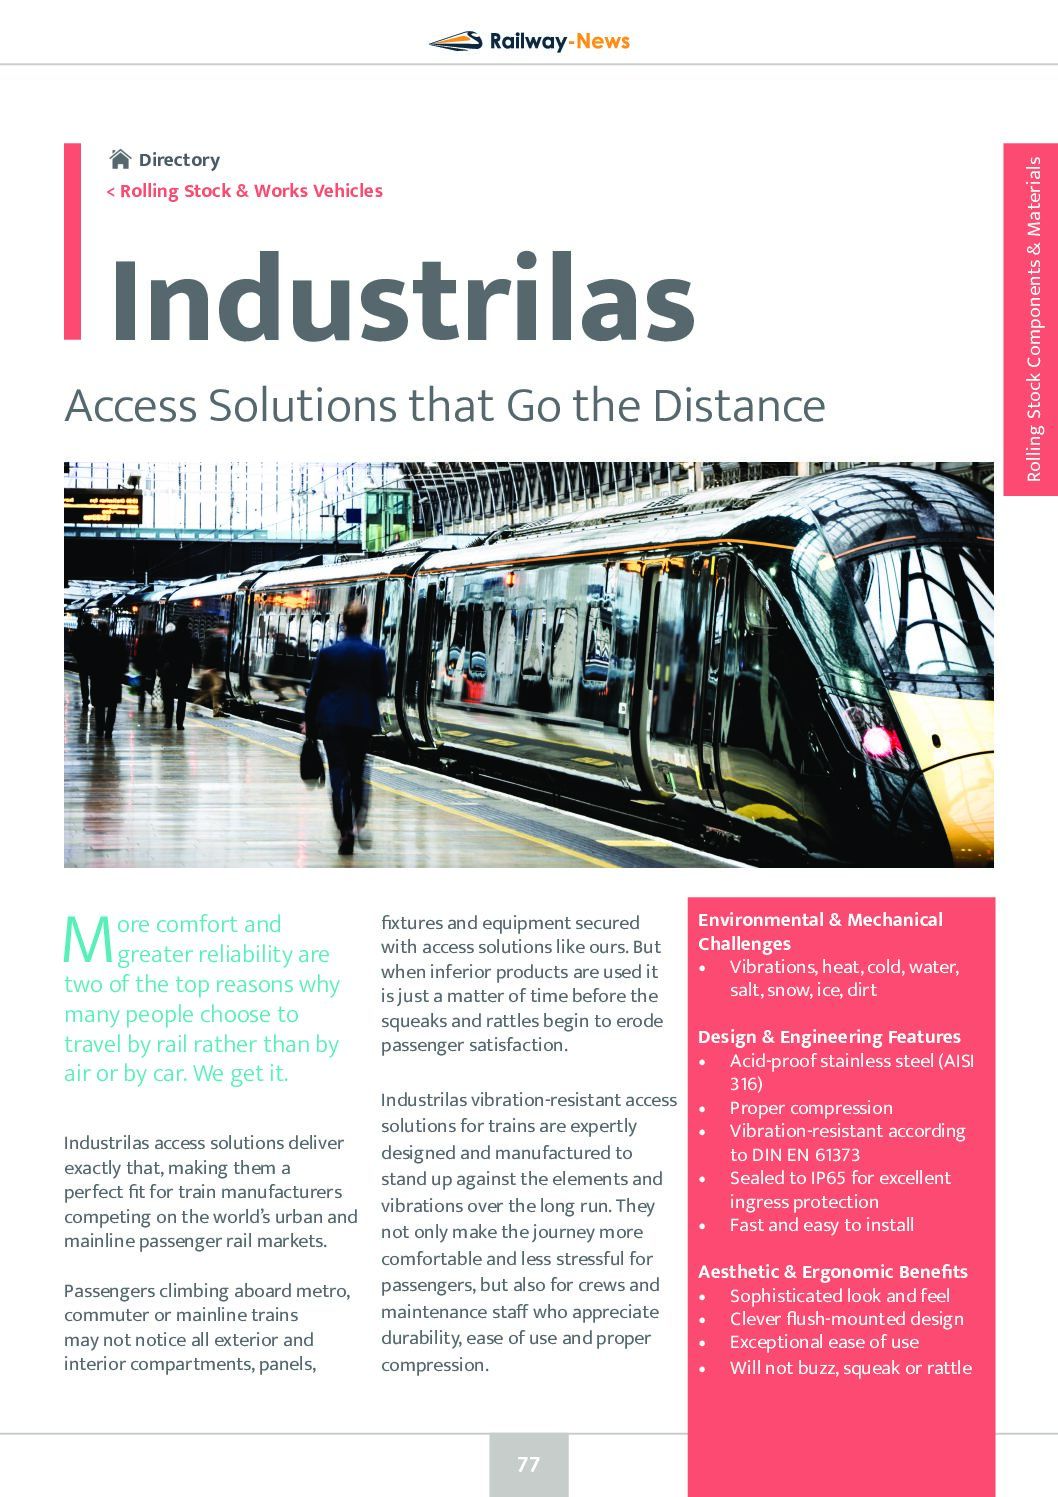 Access Solutions that Go the Distance